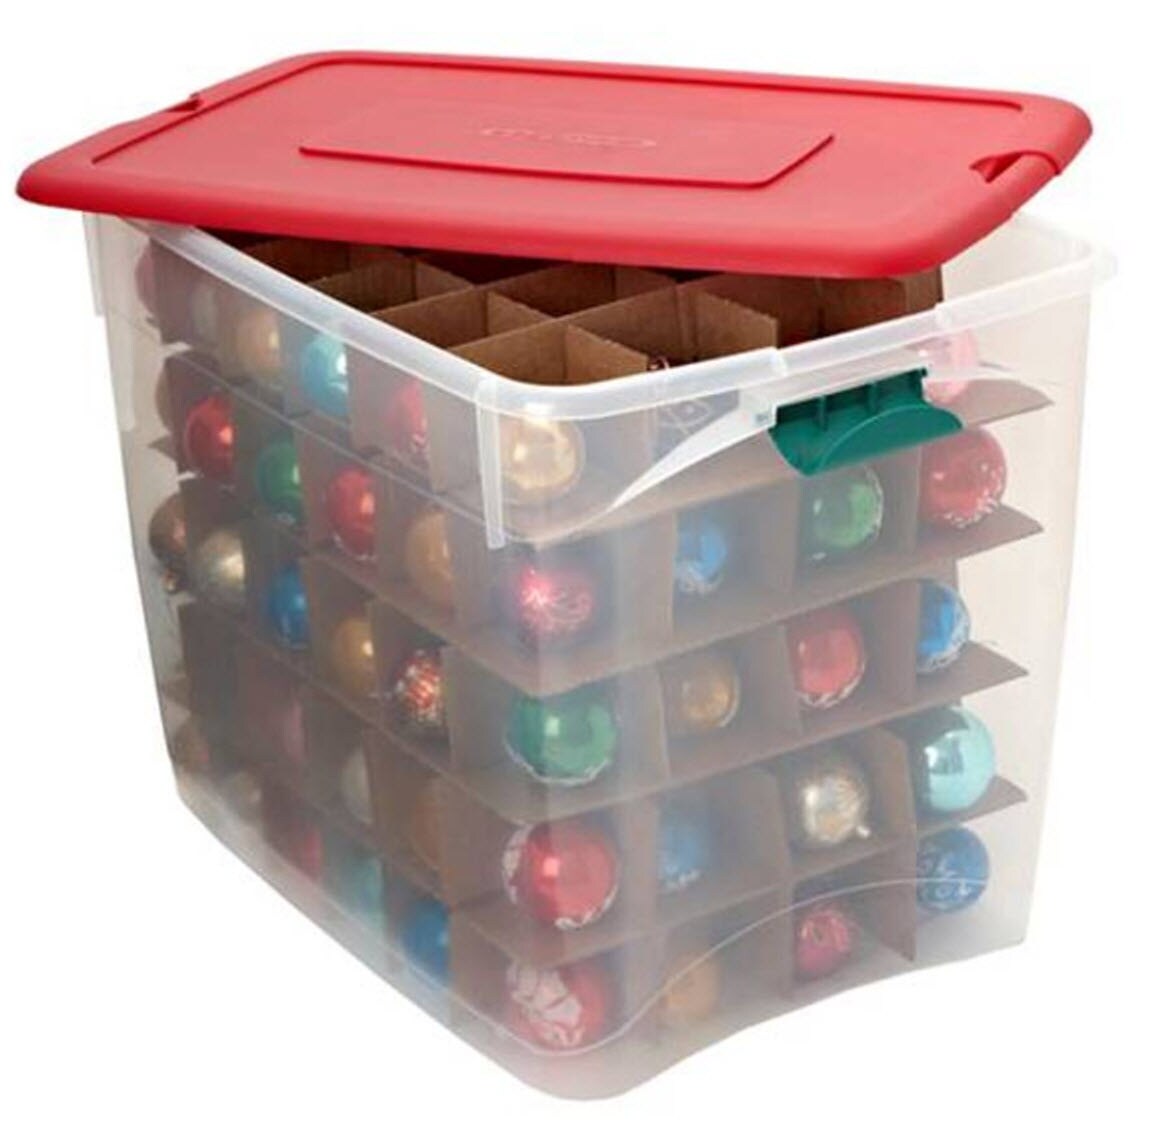 Homz Holiday Ornament Latching Storage Container - Red/Clear, 64